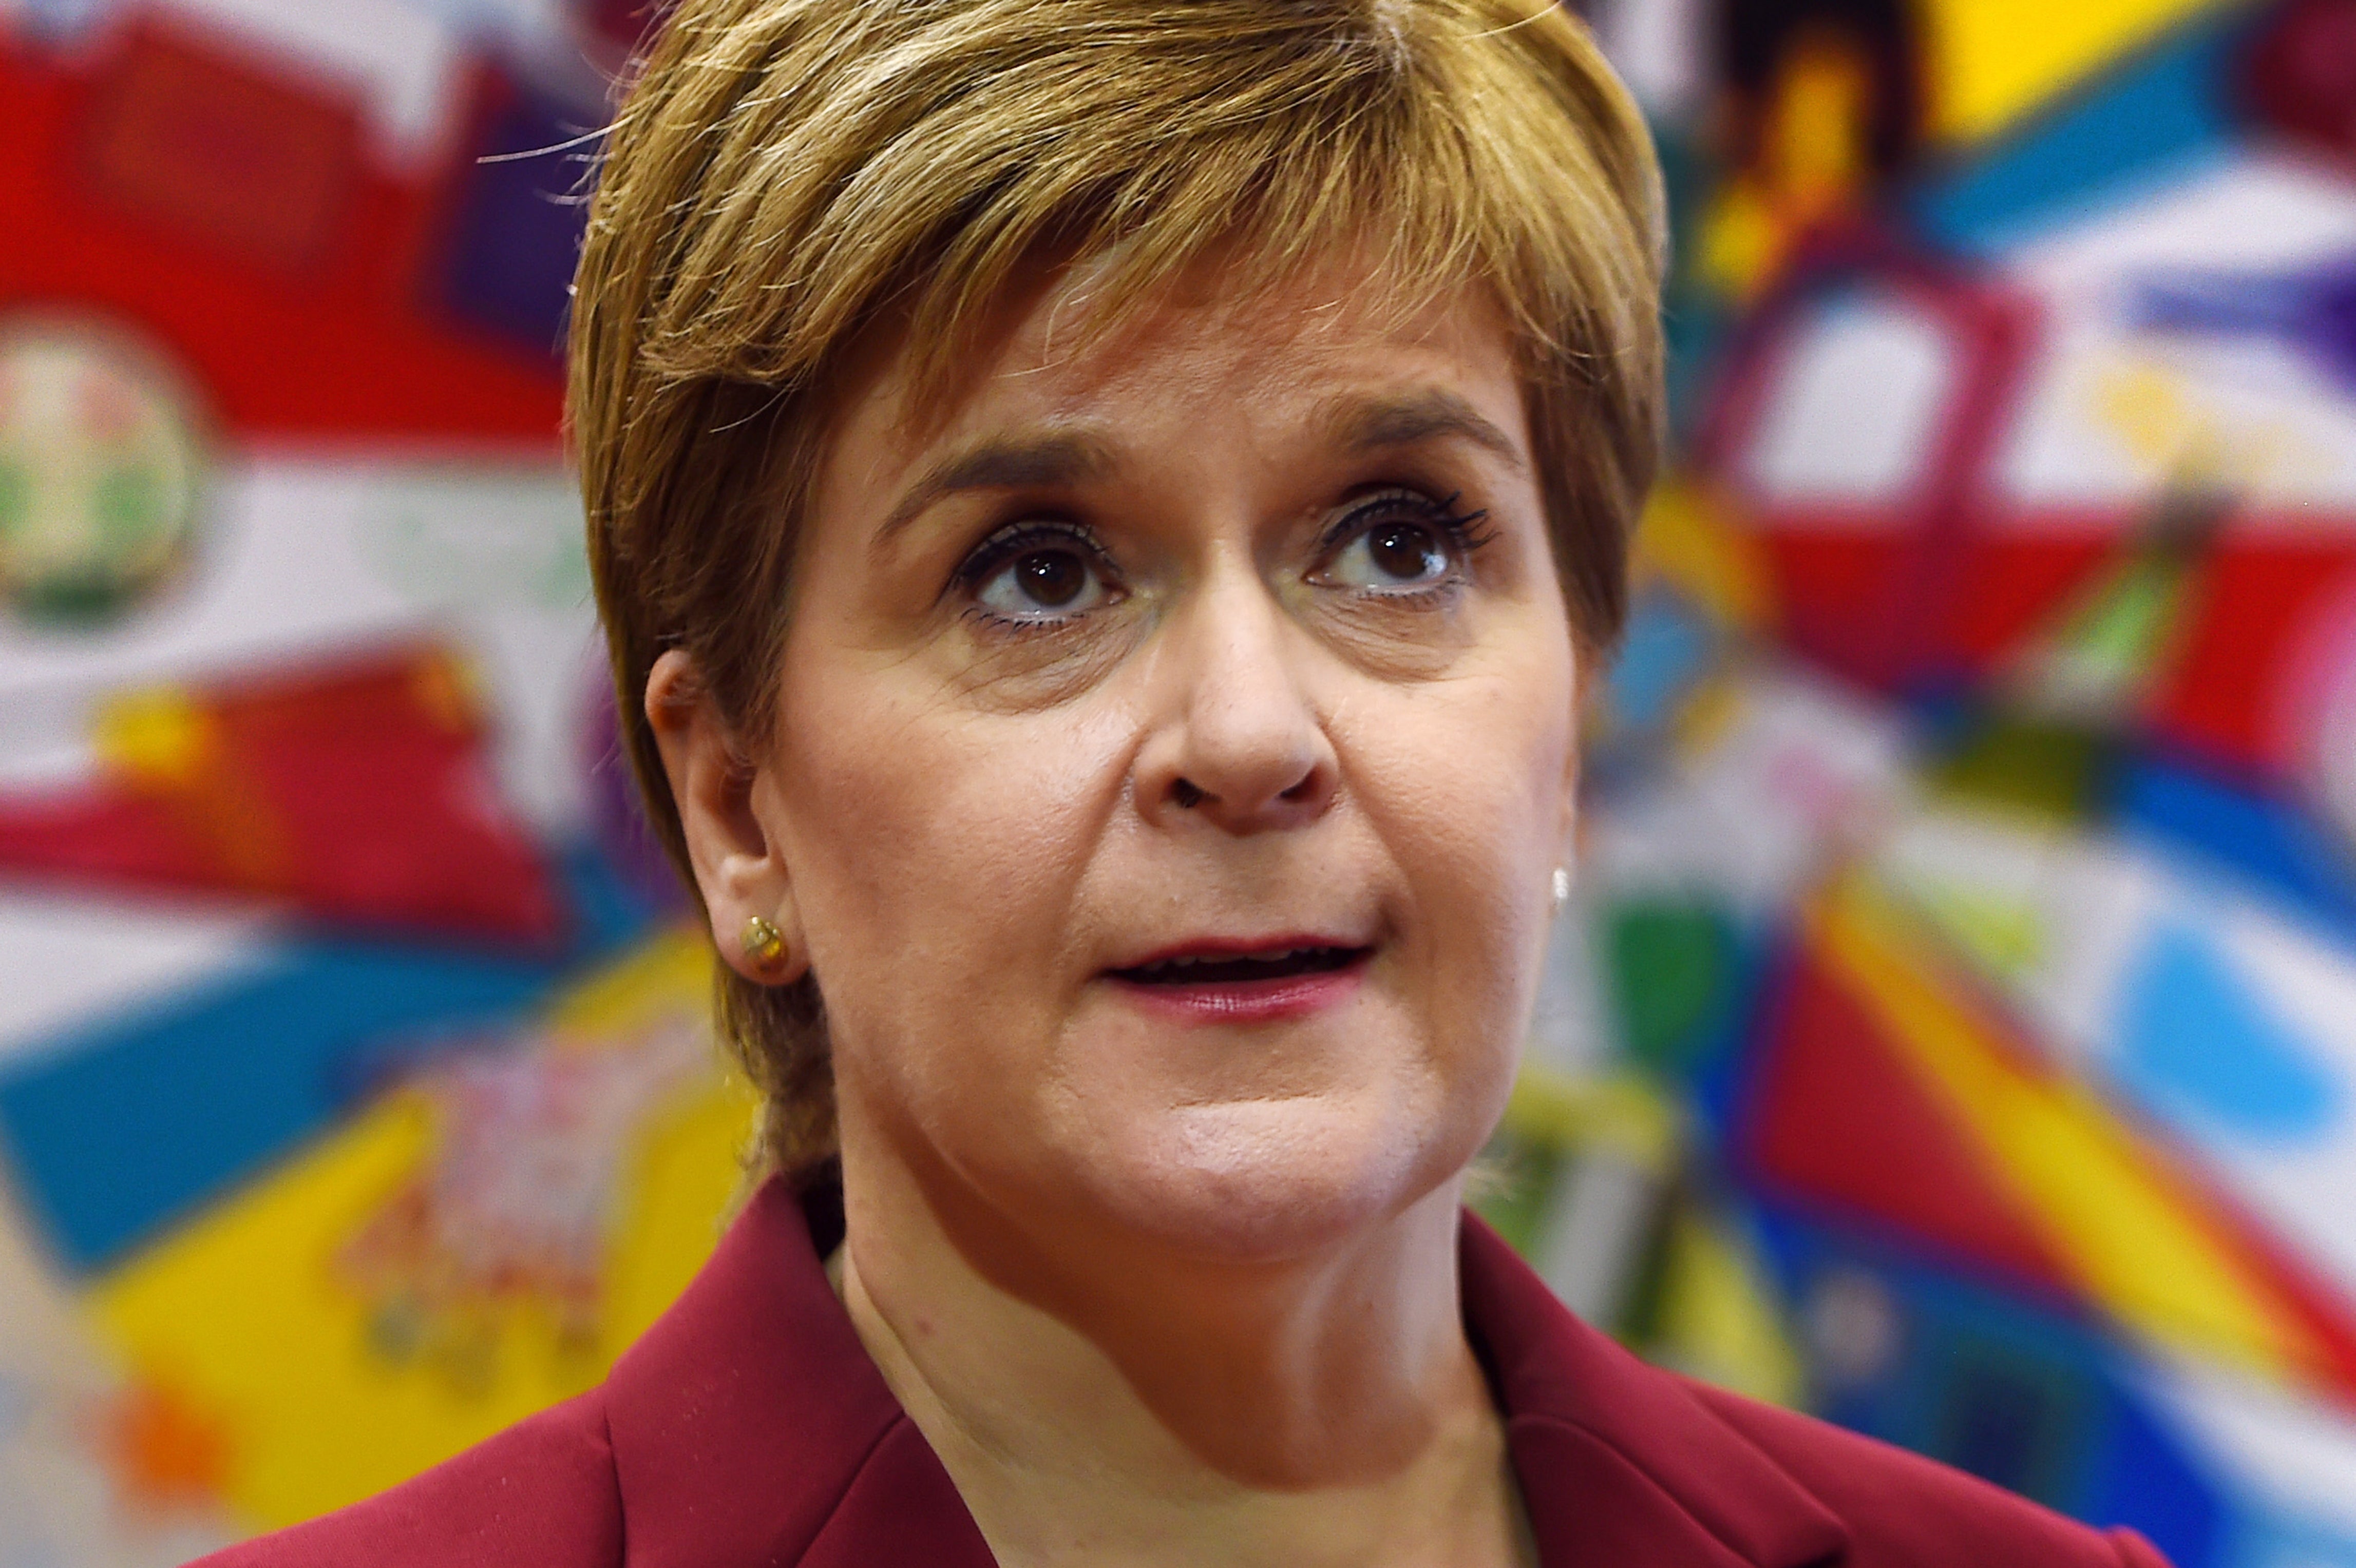 Sturgeon issued an appeal to her party on Thursday